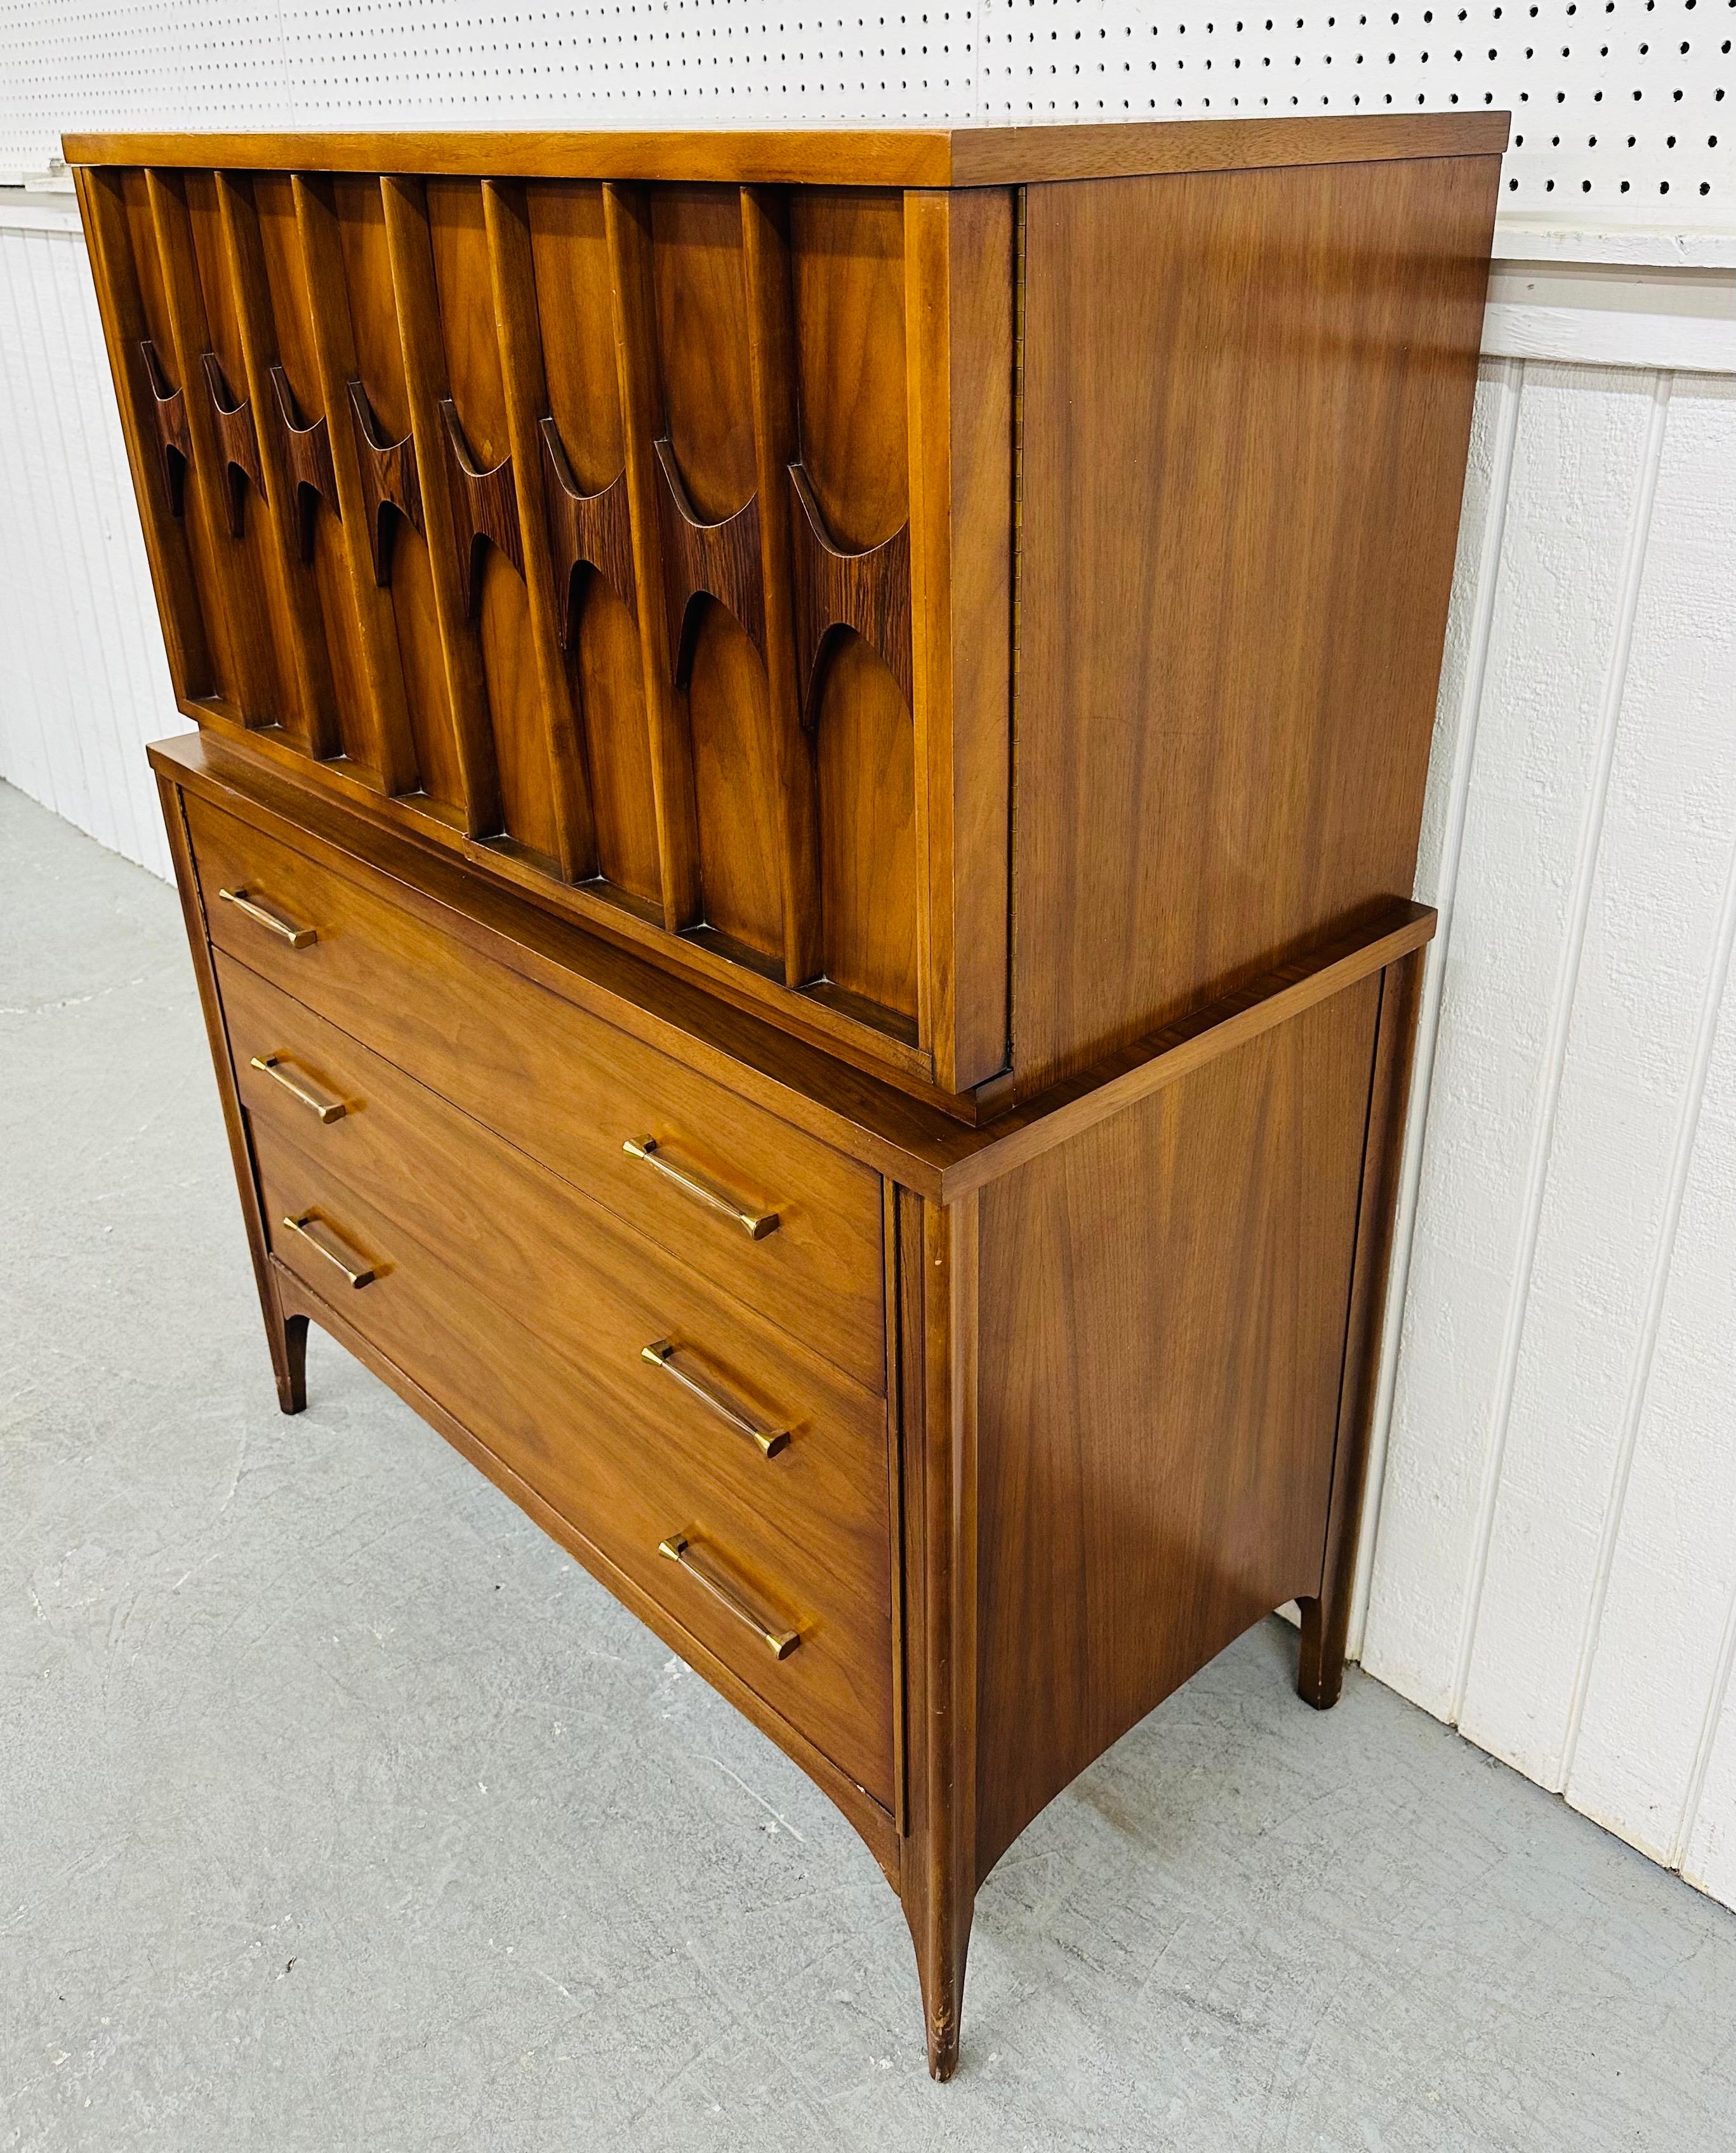 This listing is for a Mid-Century Modern Kent Coffey Perspecta Walnut High Chest. Featuring a straight line design, two doors with sculpted rosewood pulls that open up to storage space, three large drawers at the bottom with original hardware,